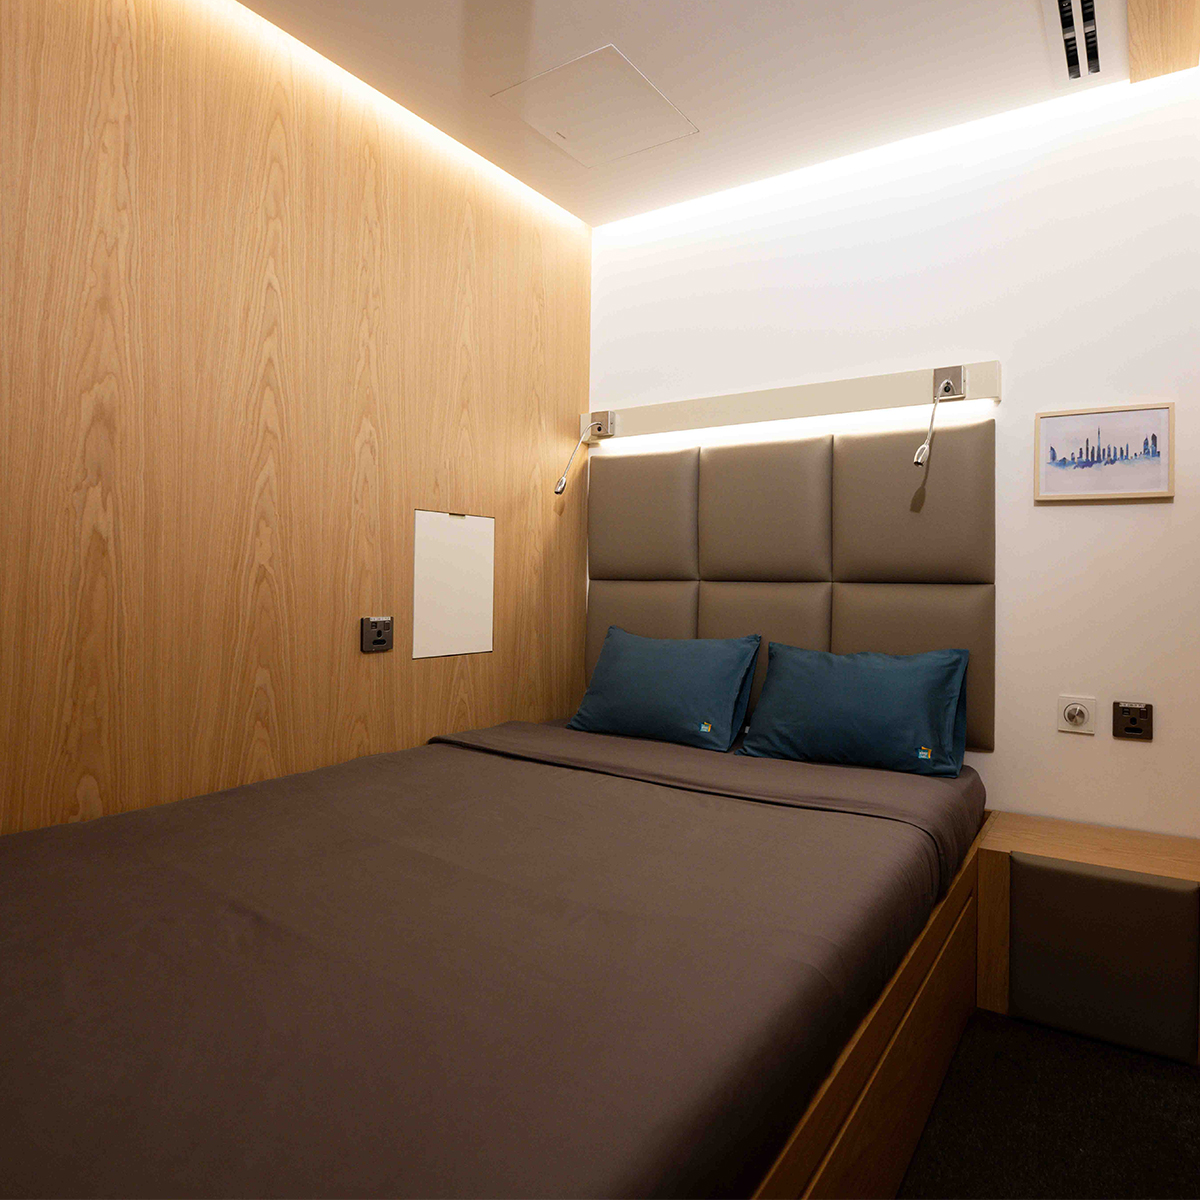 sleep 'n fly, Dubai airport, Double cabin, double room with bed